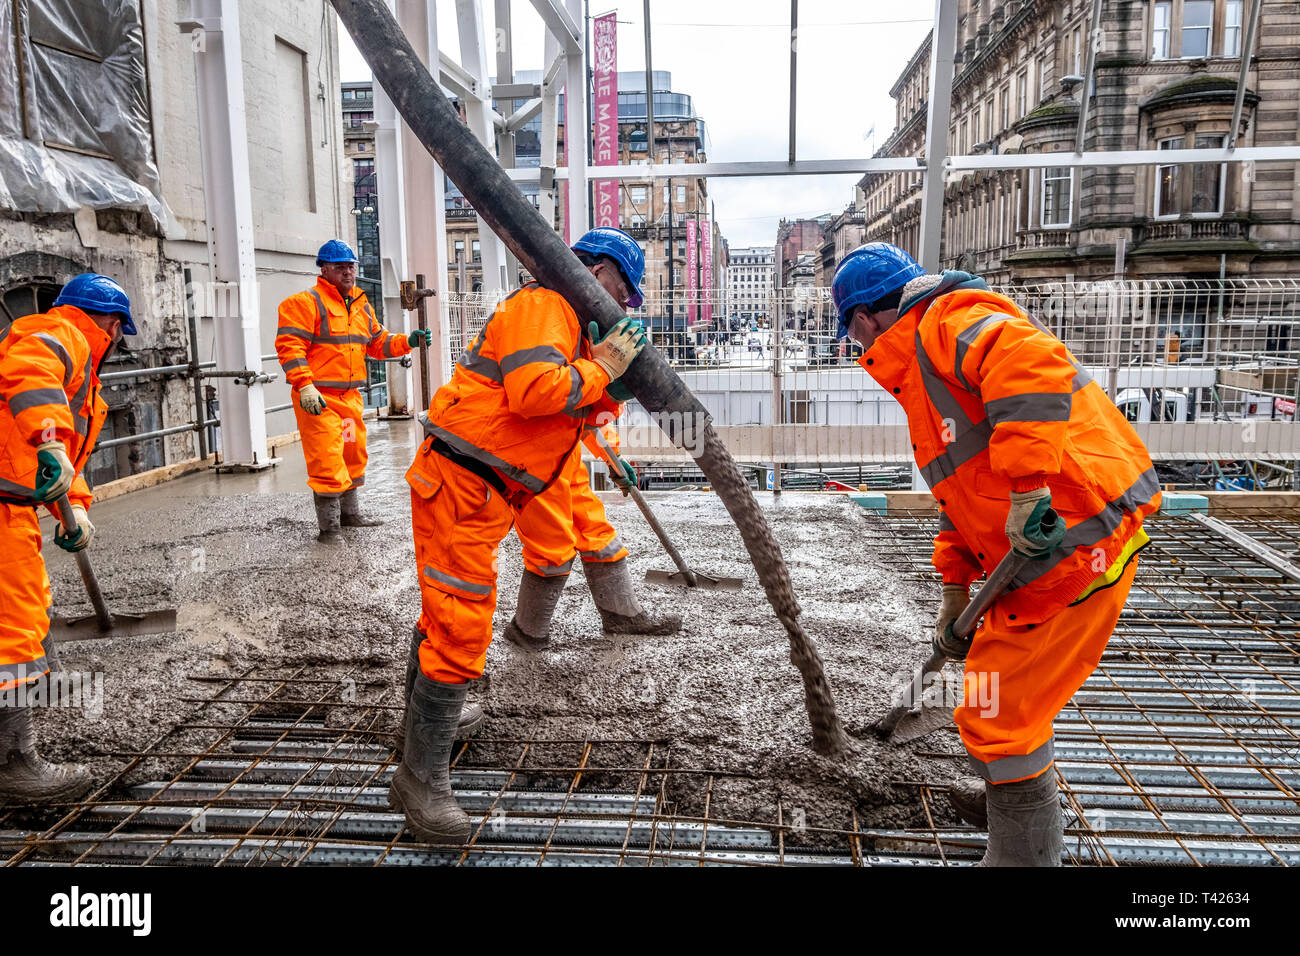 Concrete being poured for new train station platform Stock Photo